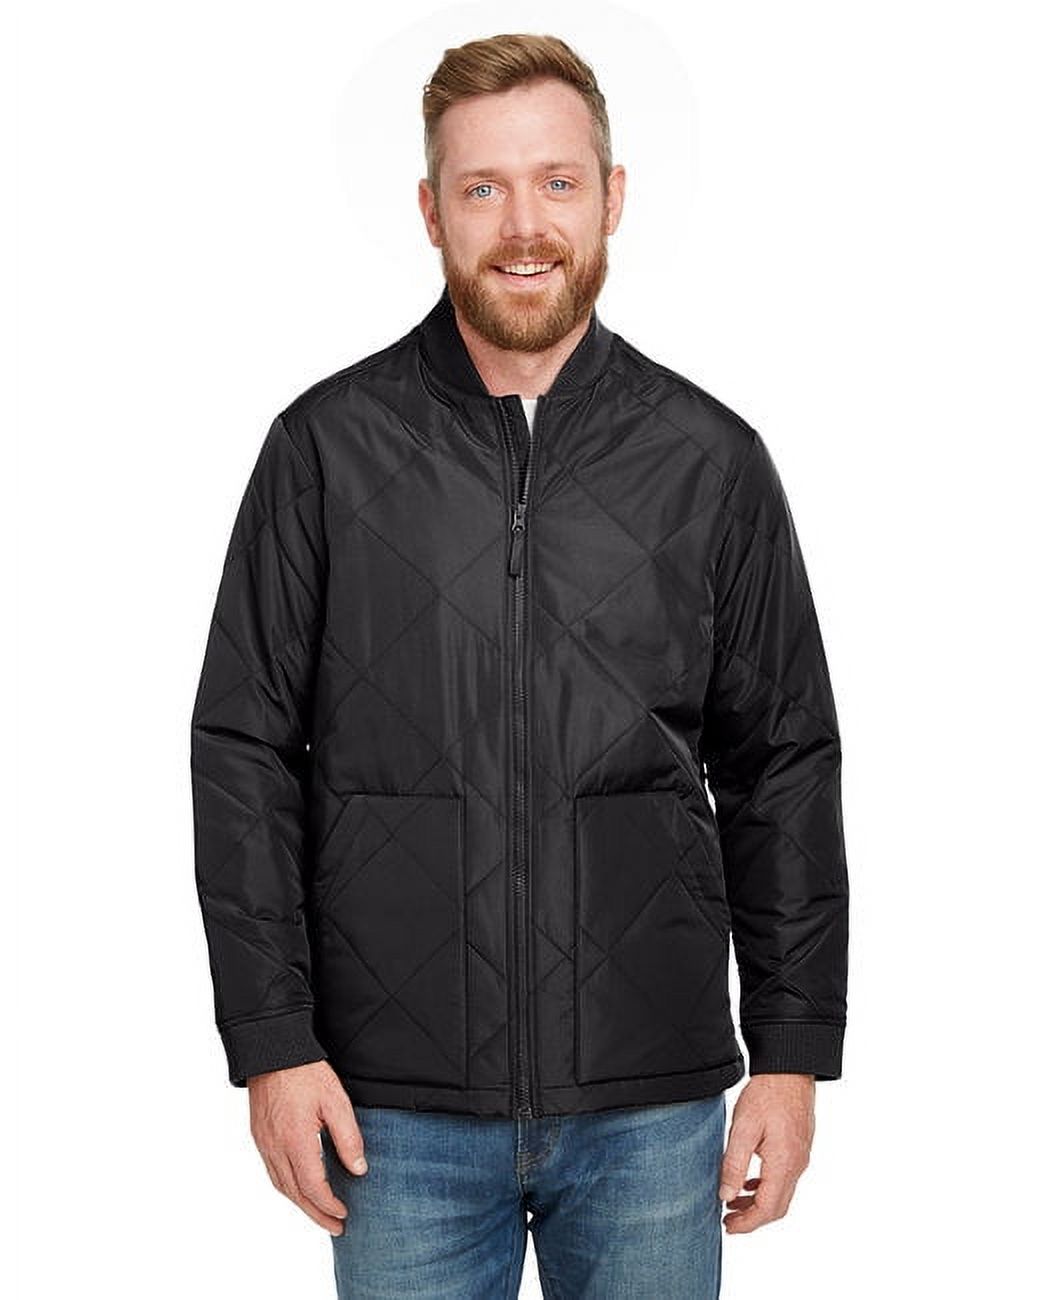 Adult Dockside Insulated Utility Jacket - DARK CHARCOAL - 4XL - image 1 of 3